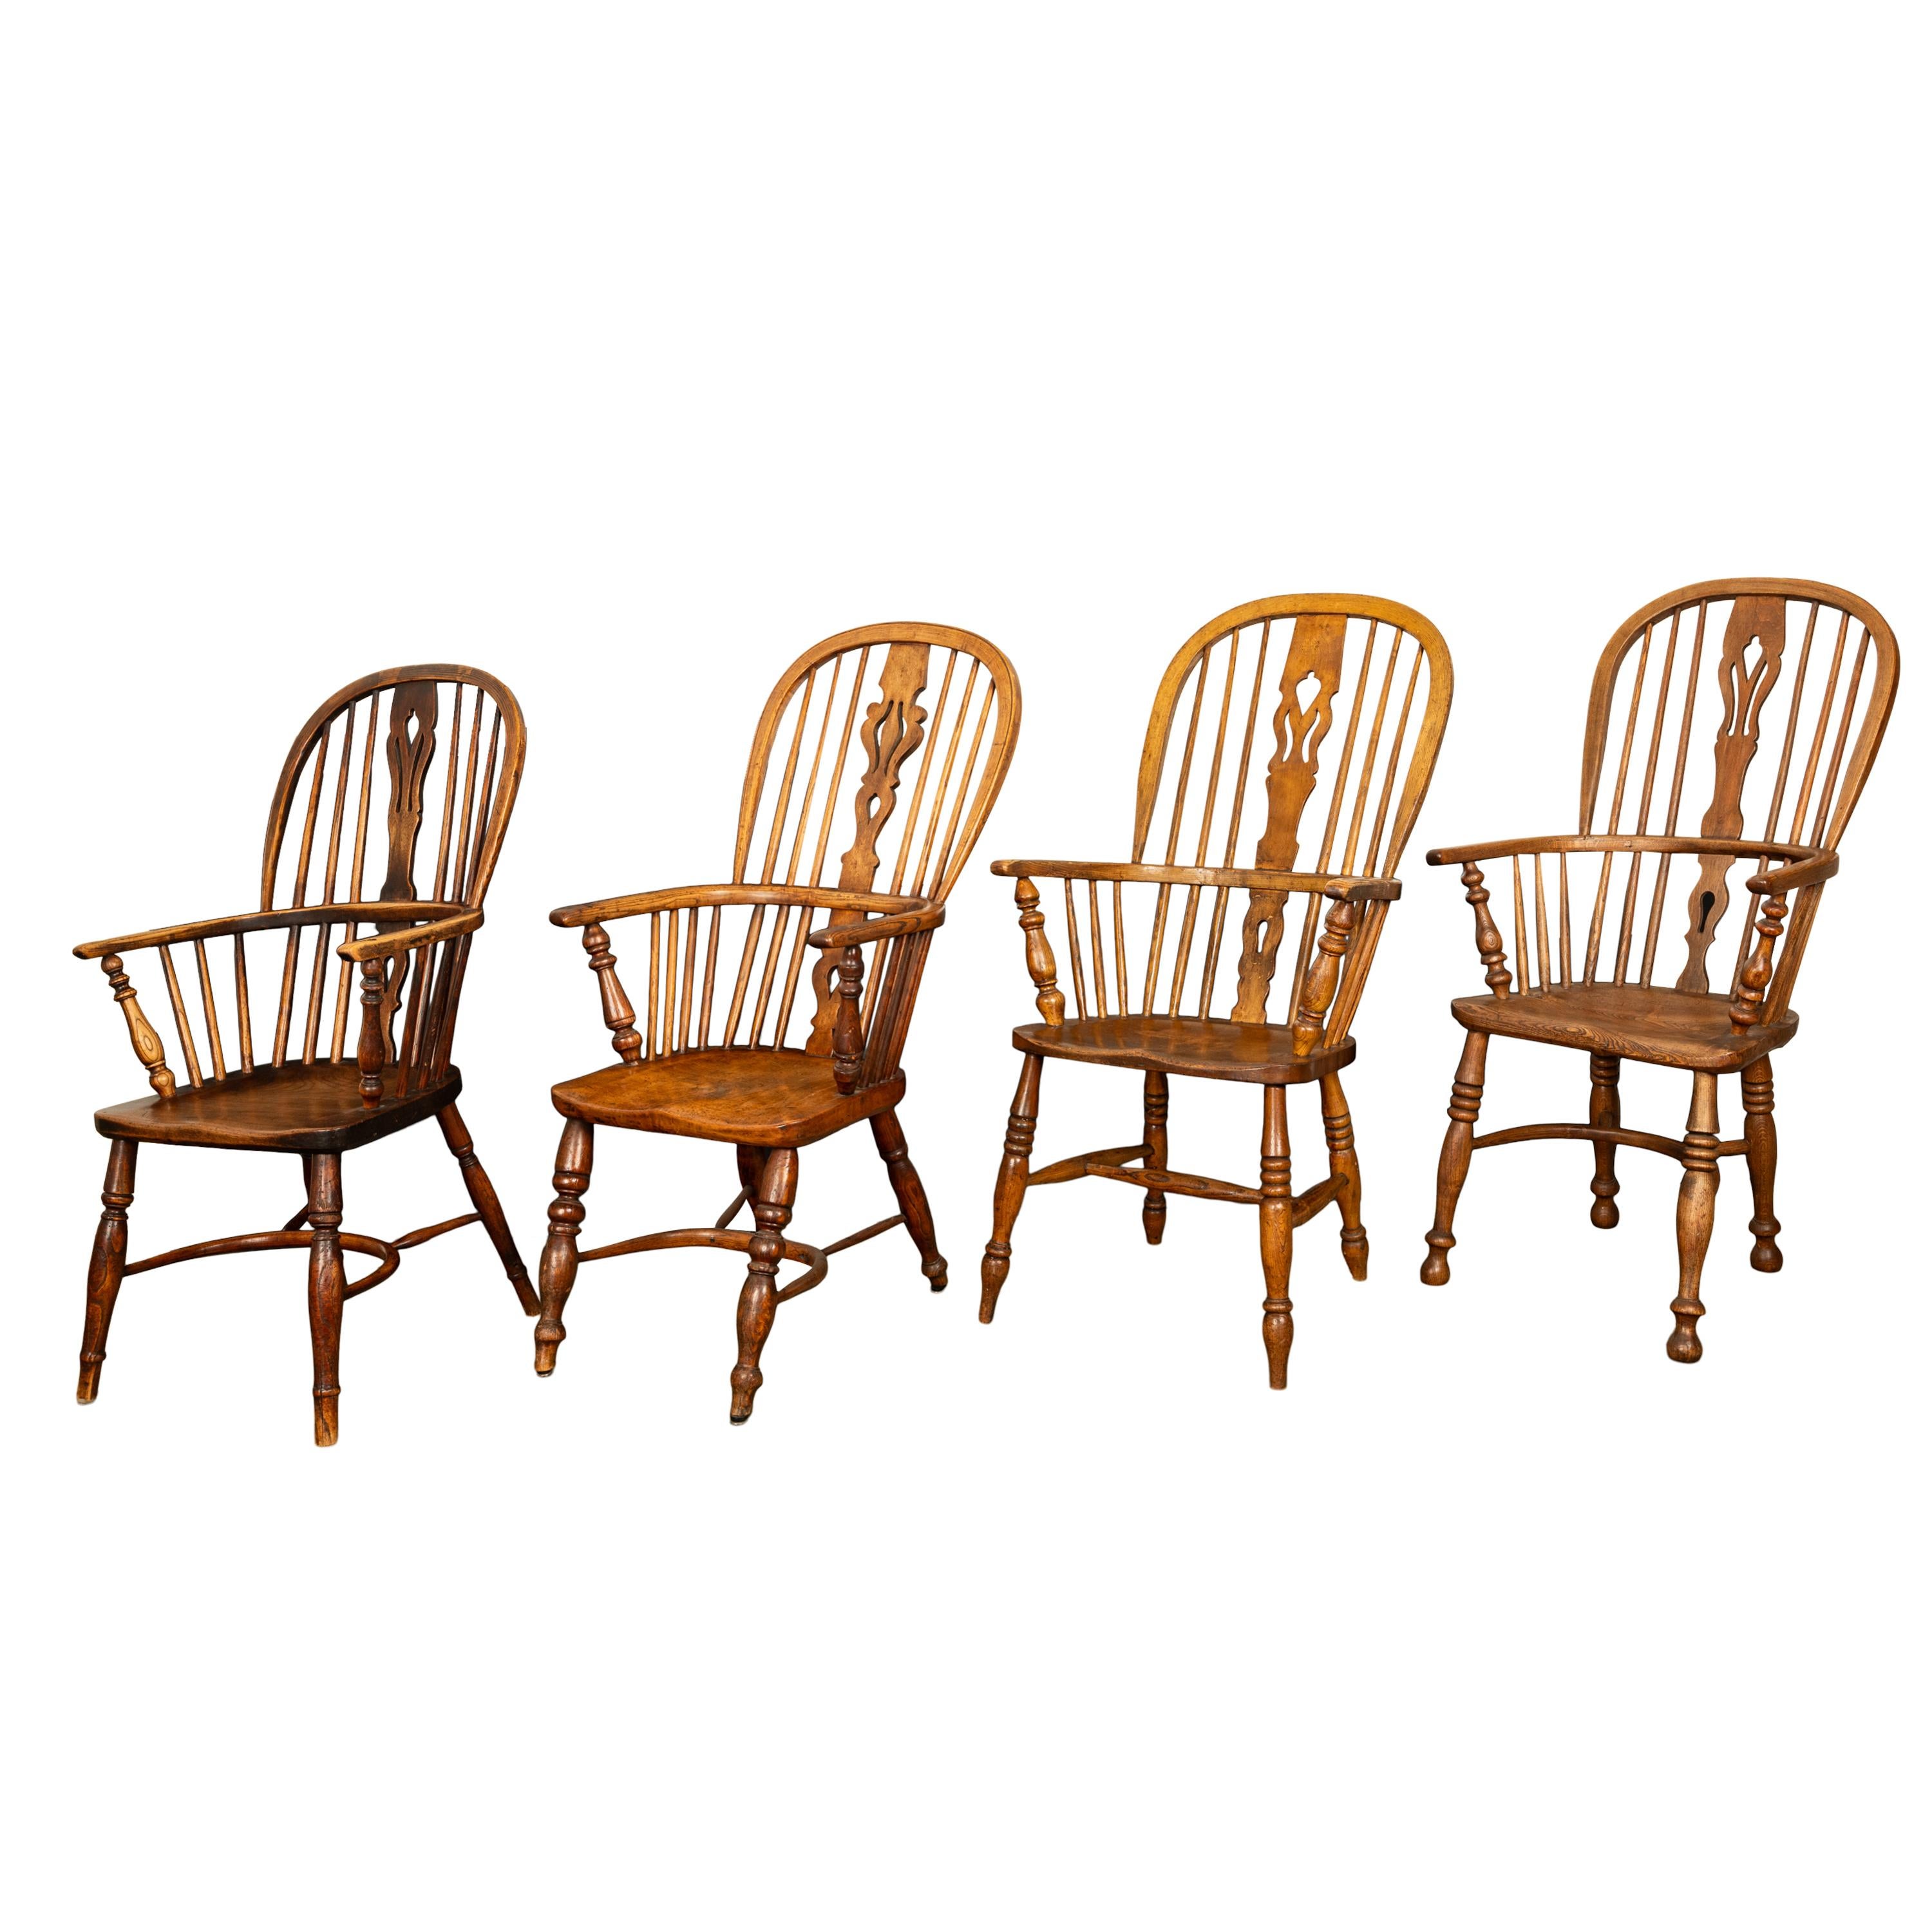 Set 4 Antique 19thC High-backed English Ash Elm Country Windsor Arm Chairs 1840  In Good Condition For Sale In Portland, OR